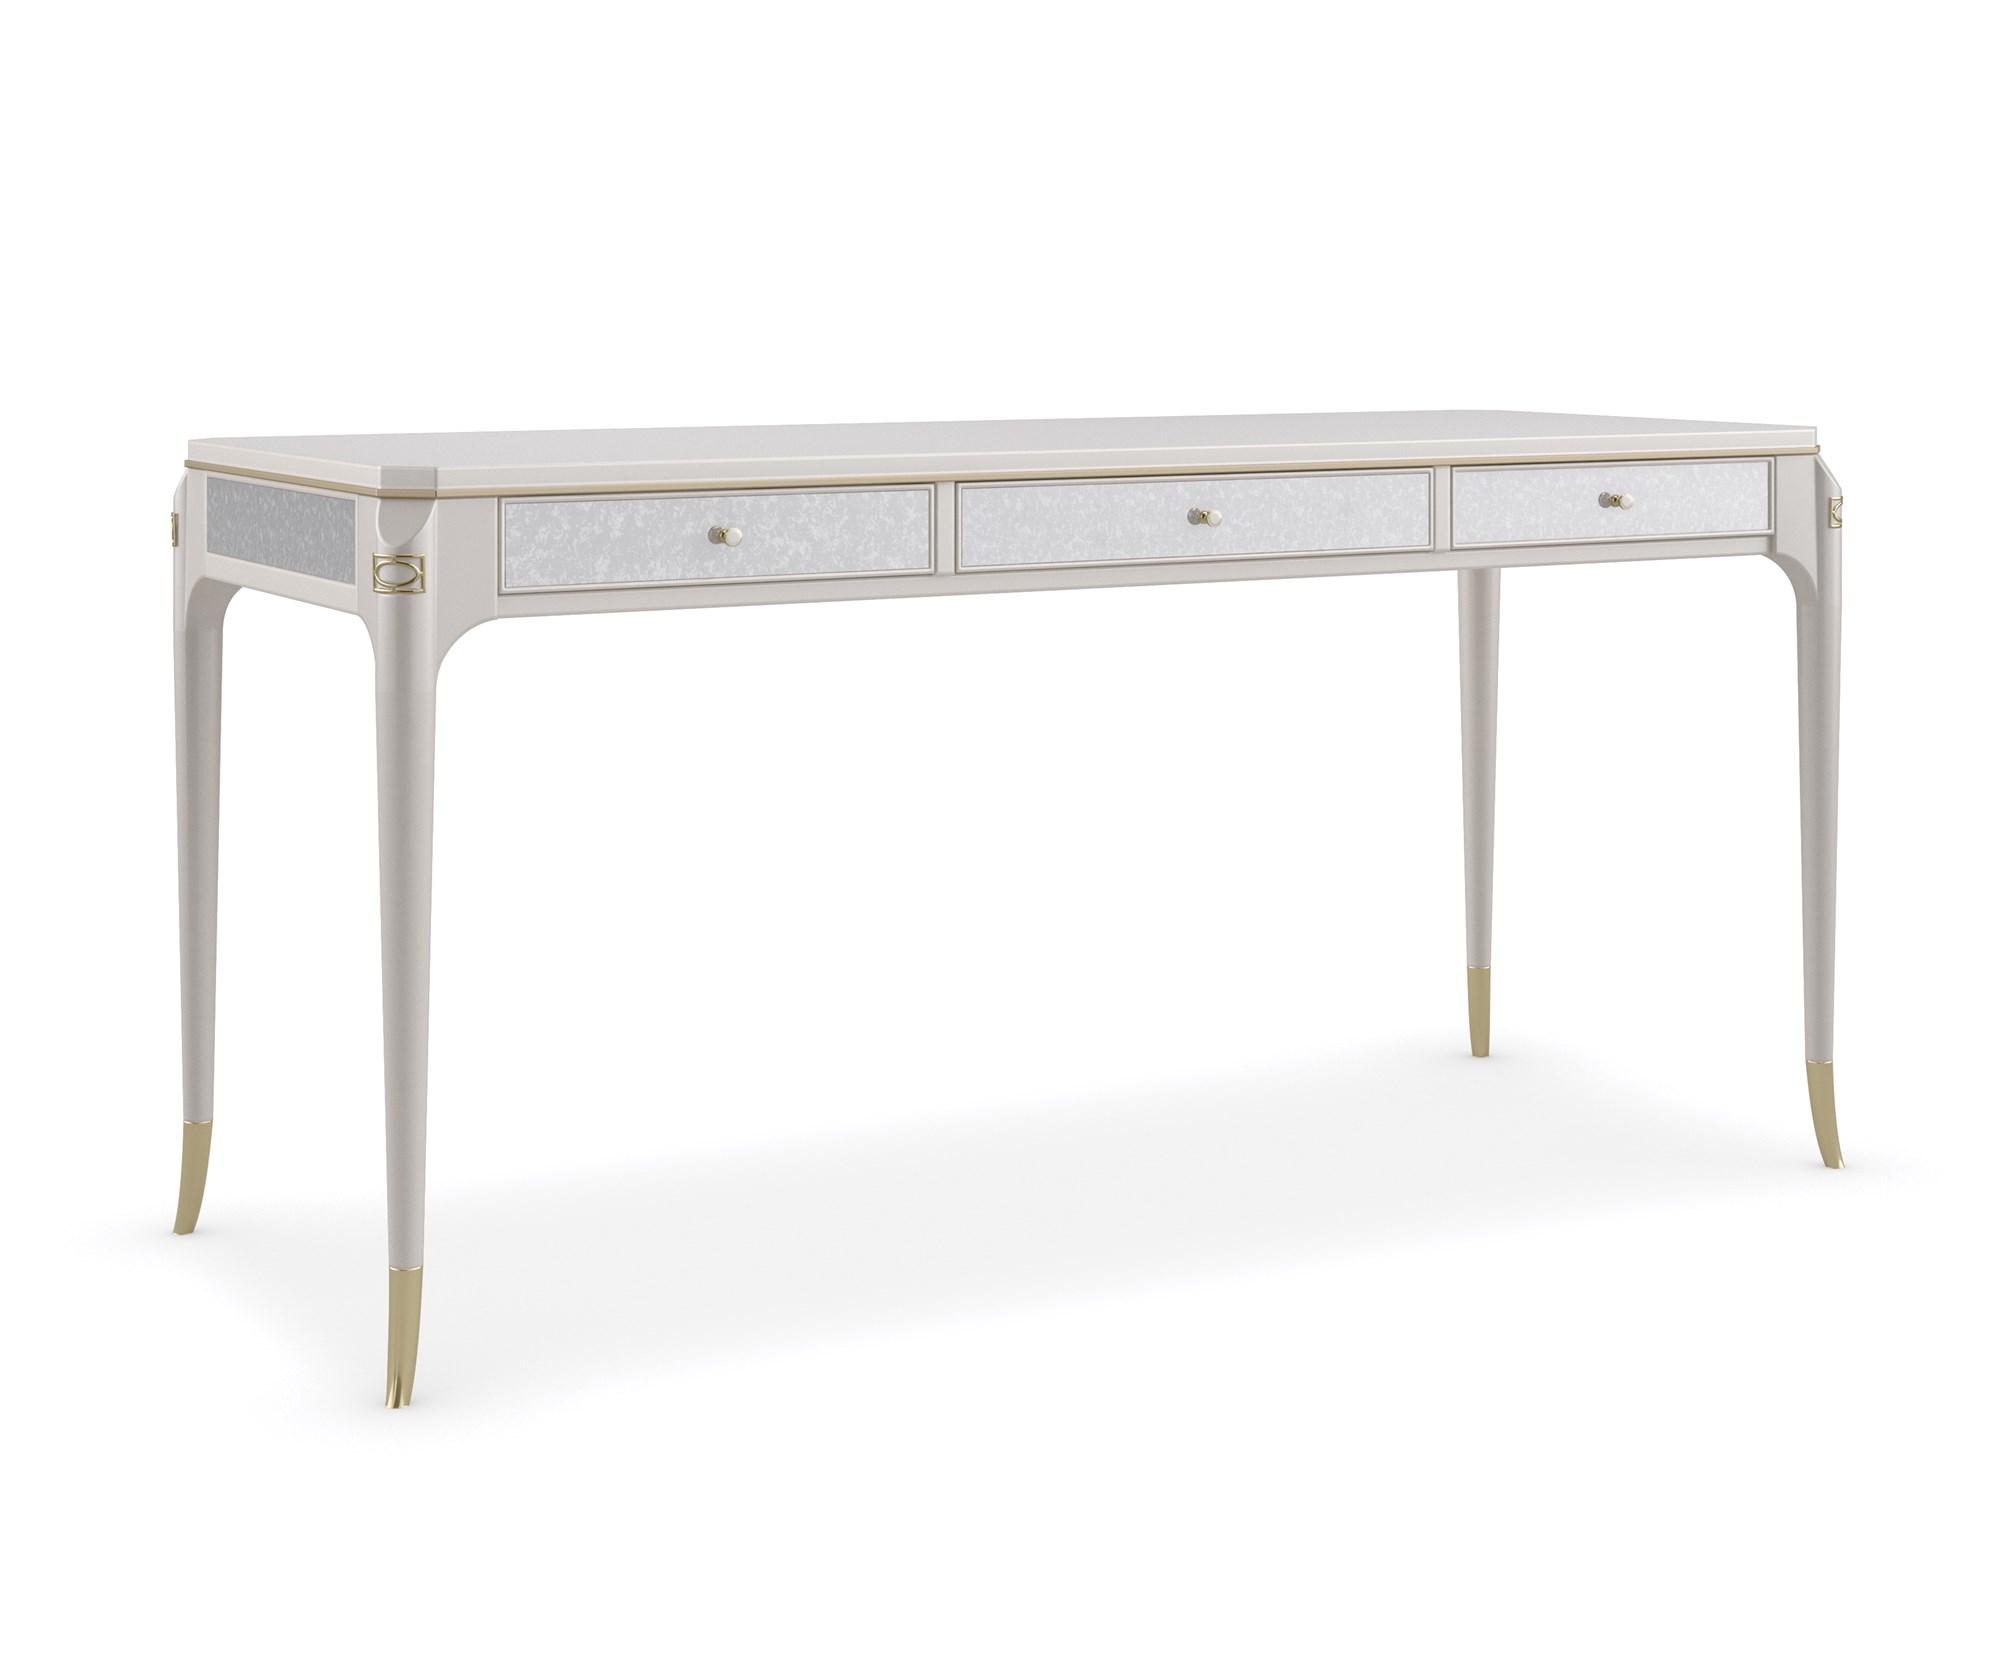 Contemporary Console Table SINCERELY YOURS CLA-021-451 in Platinum, Taupe 